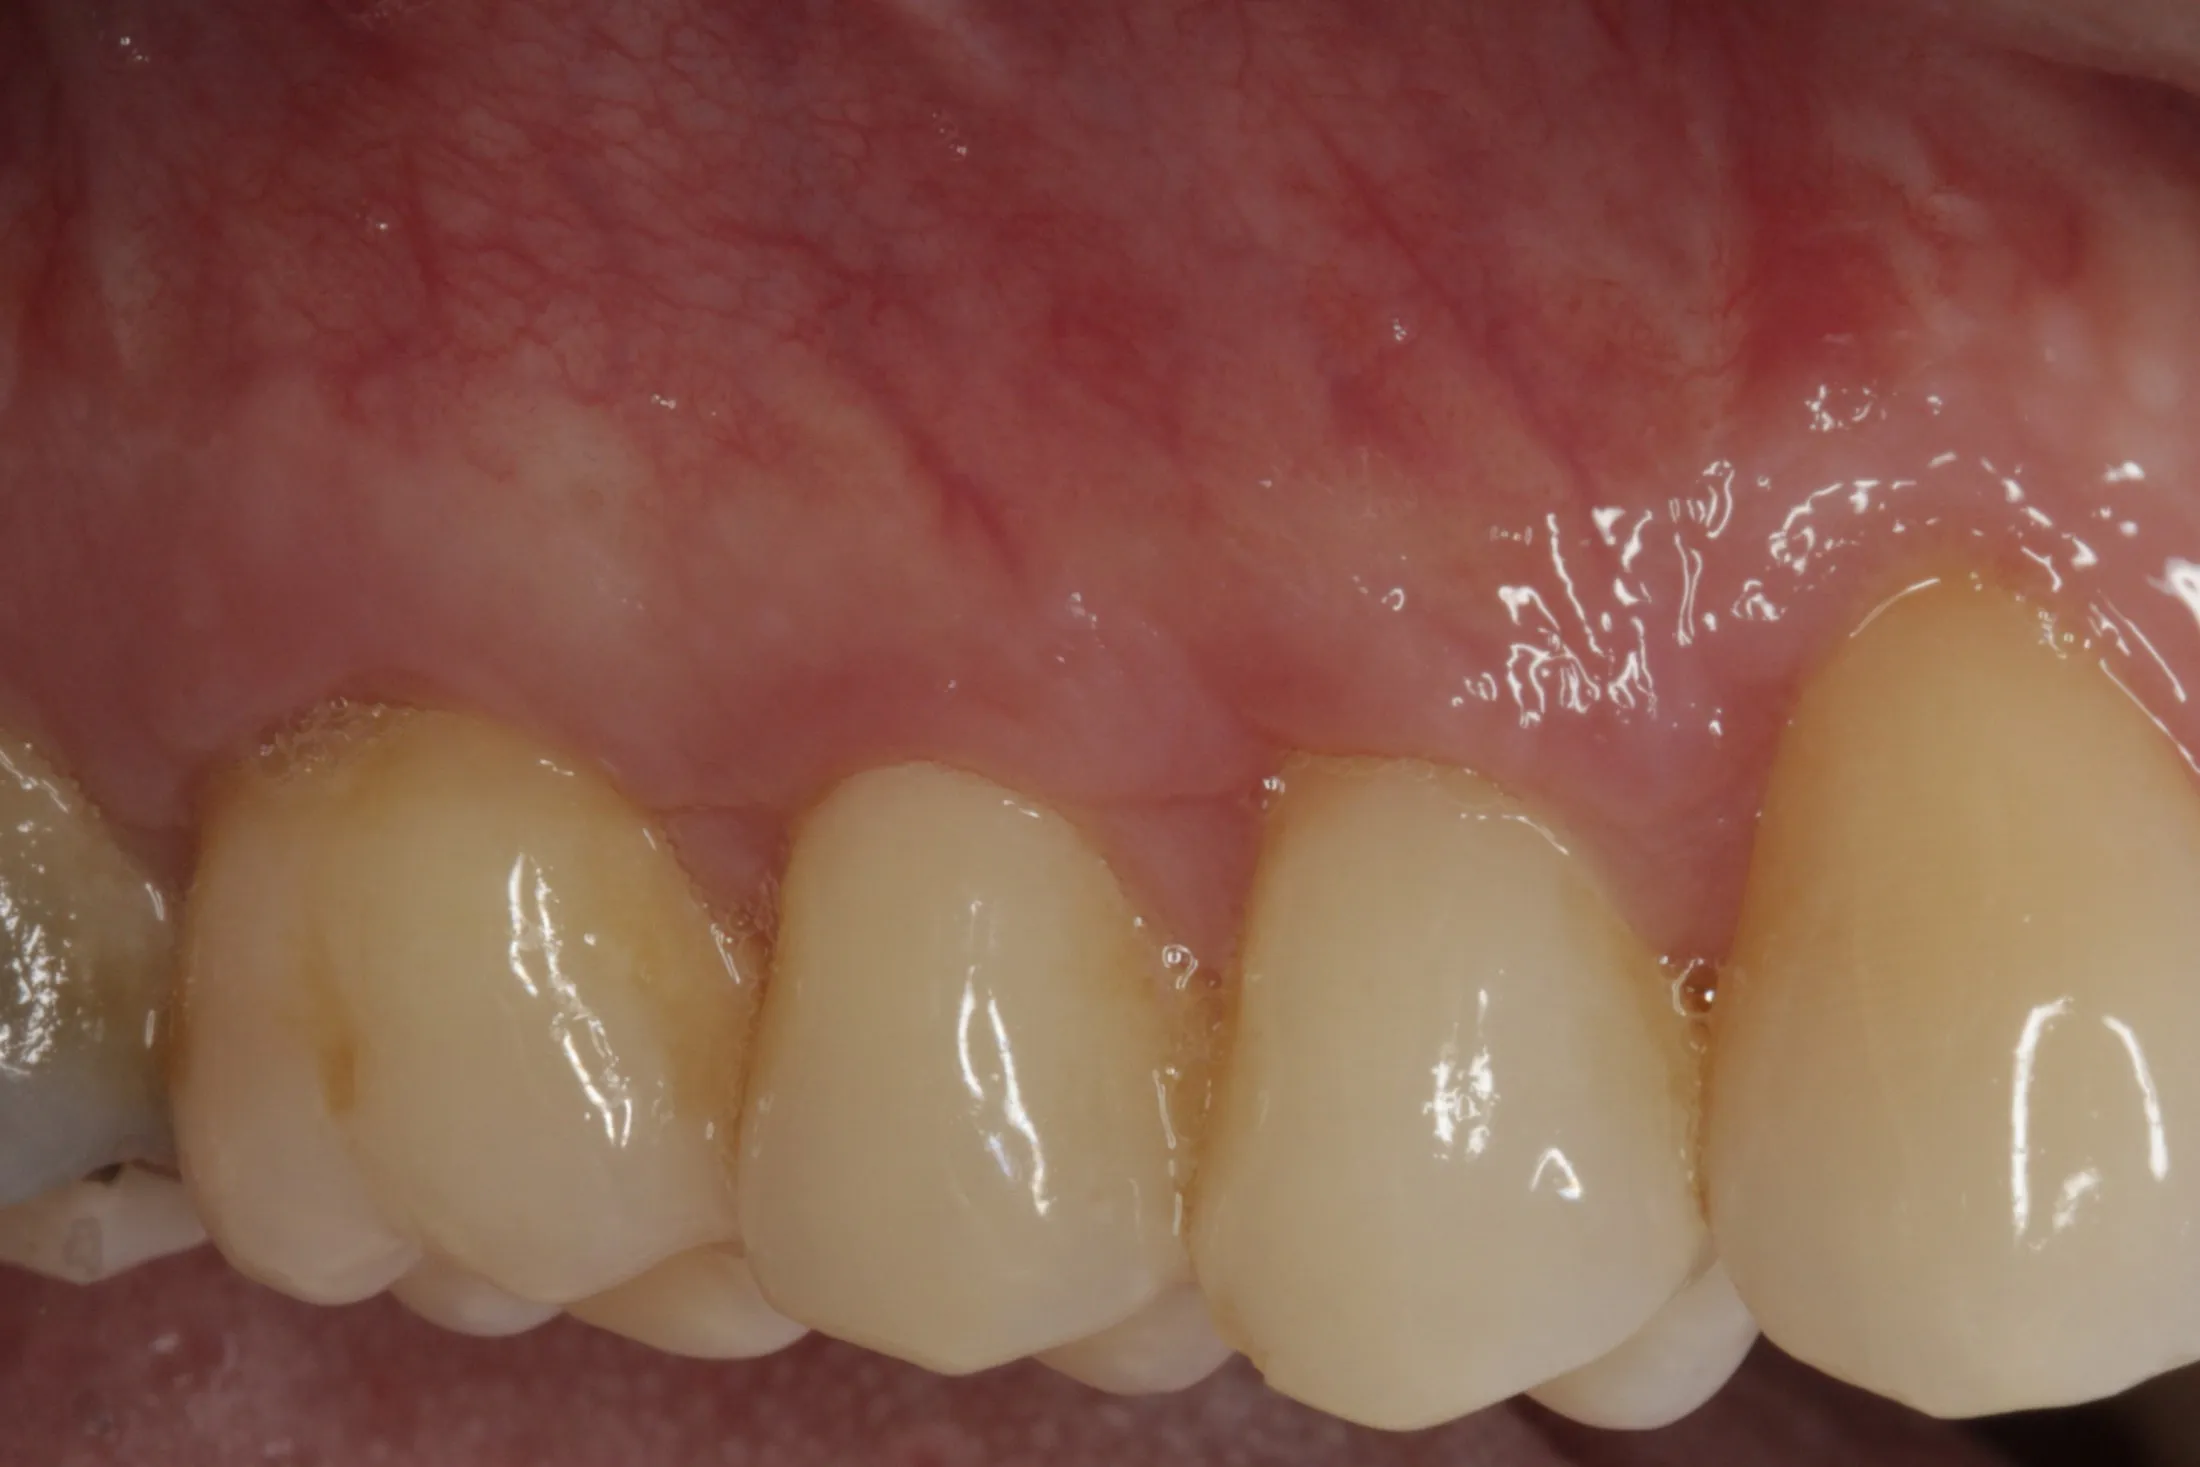 Resulting healthy gums after professional gum grafting treatment